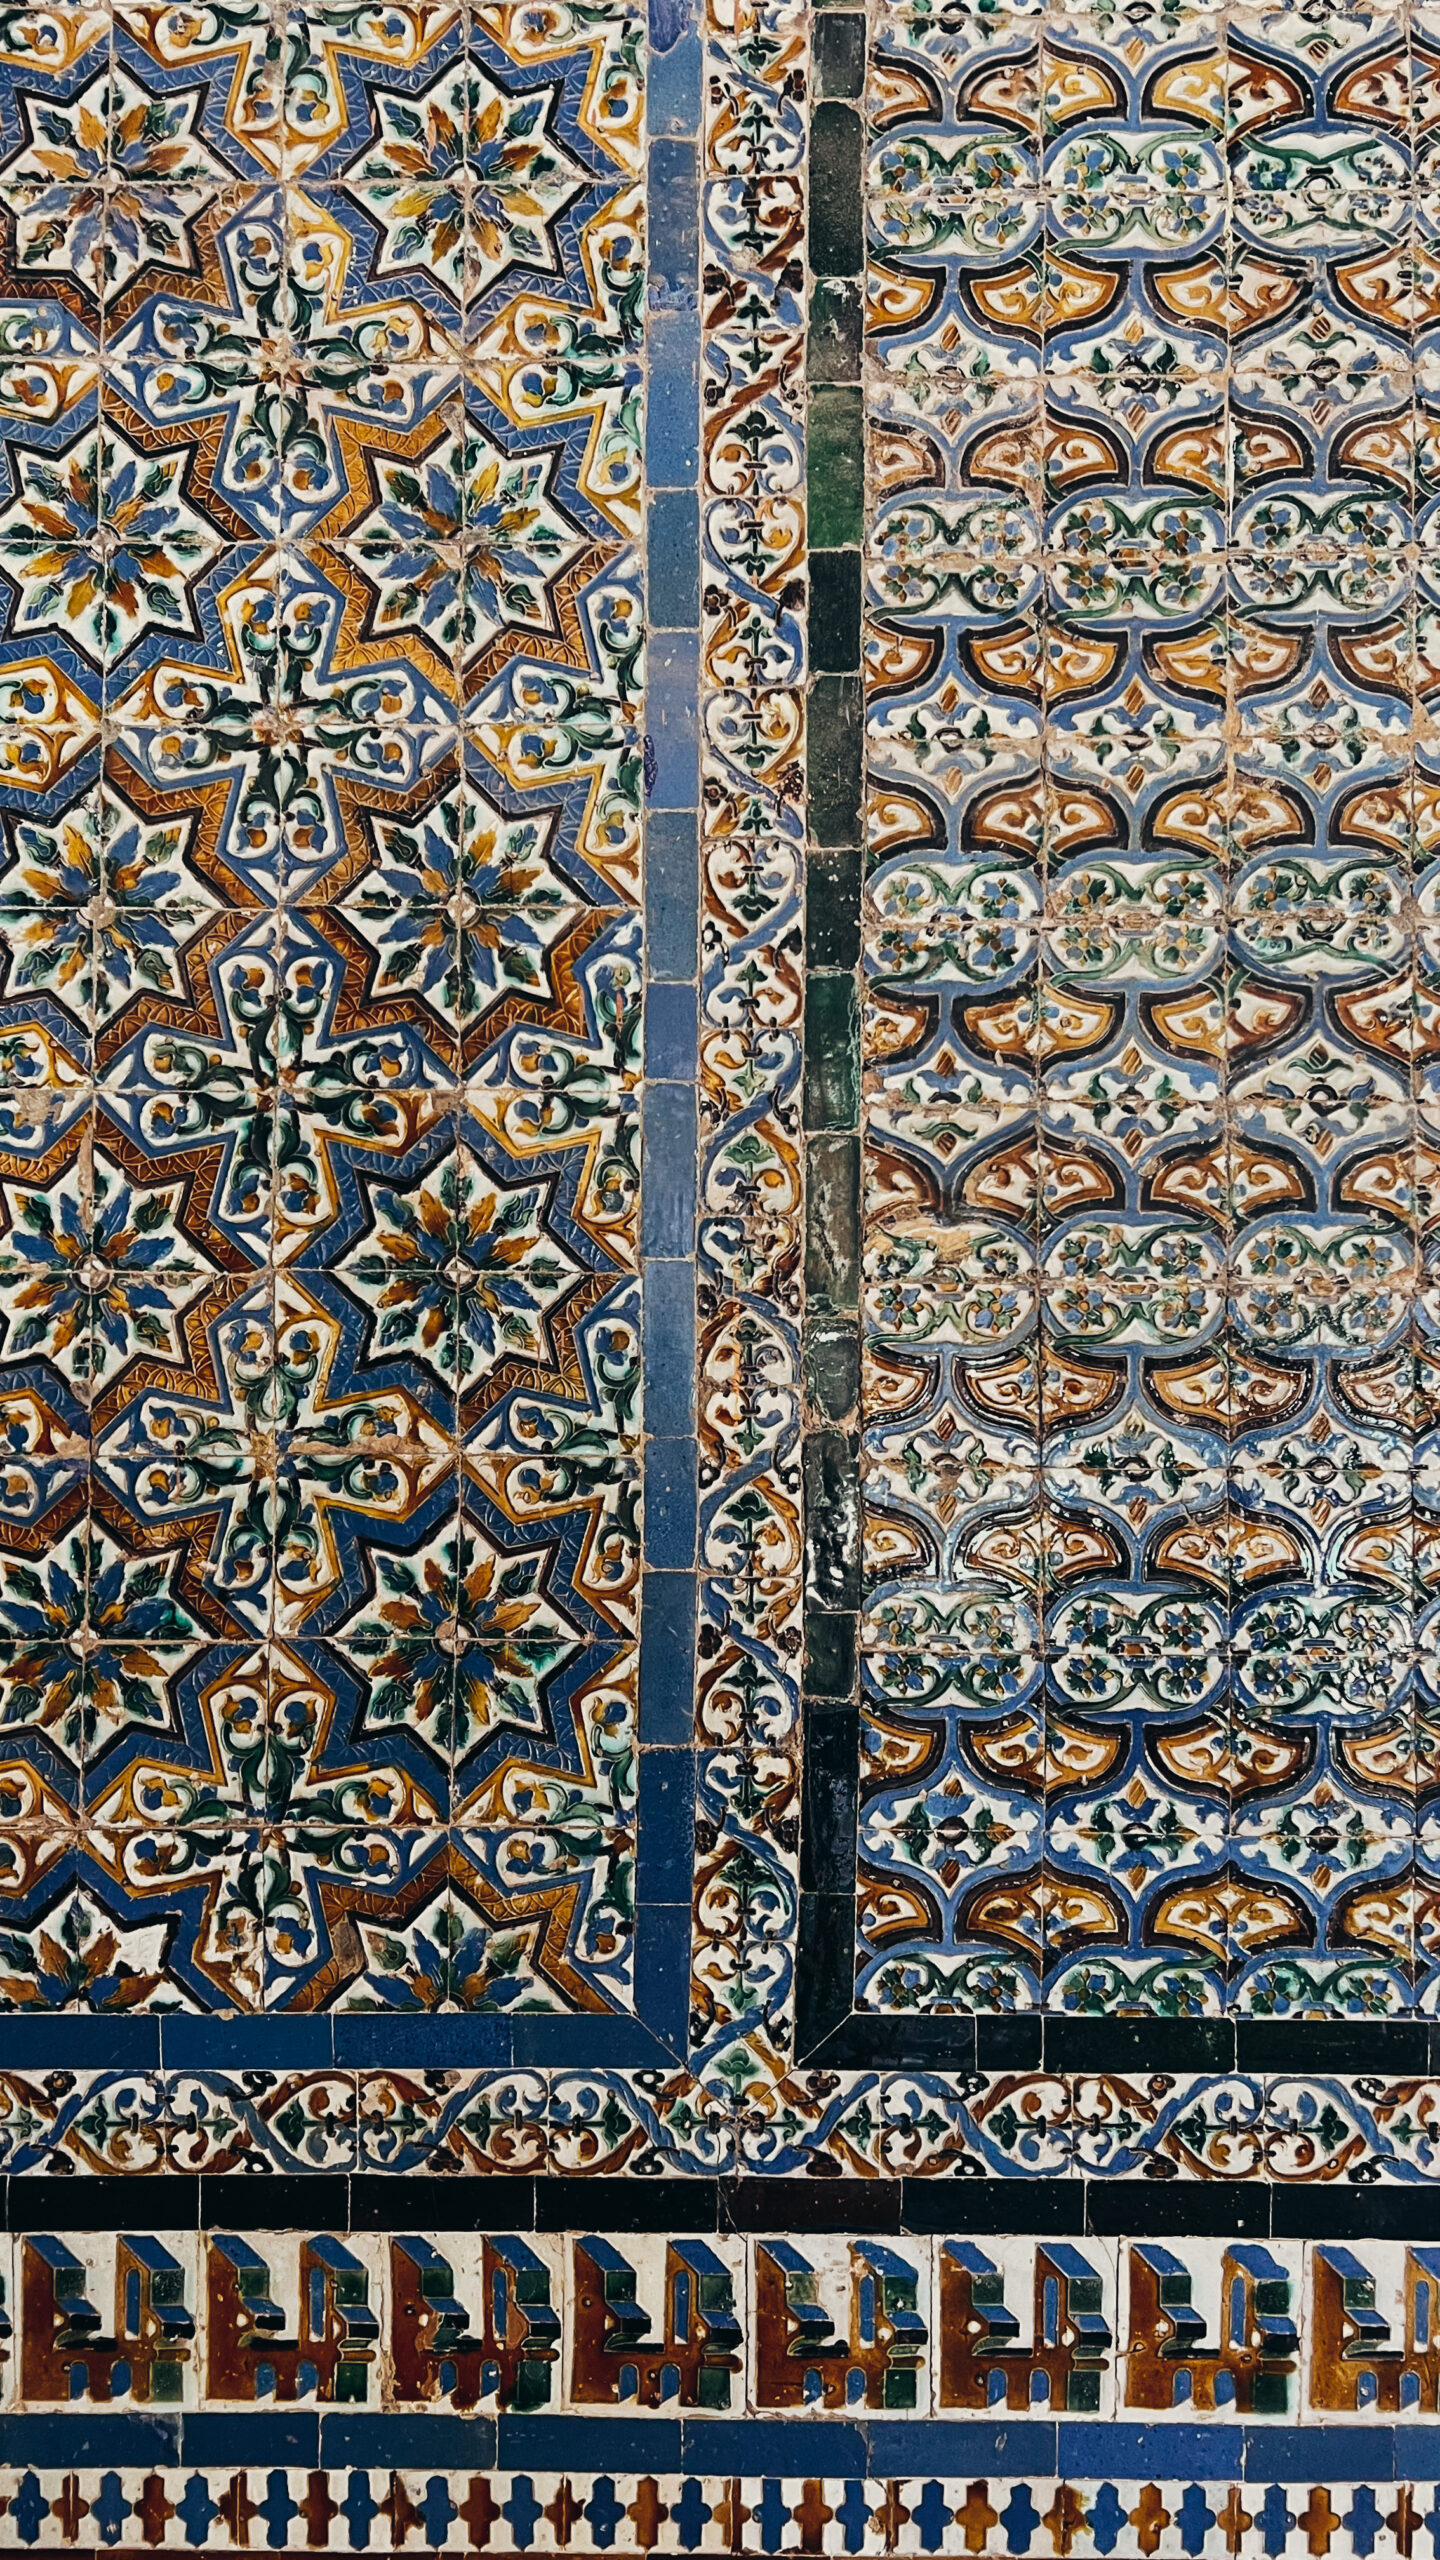 Seville weekend itinerary, Casa de Pilatos azulejos details, by Dancing the Earth